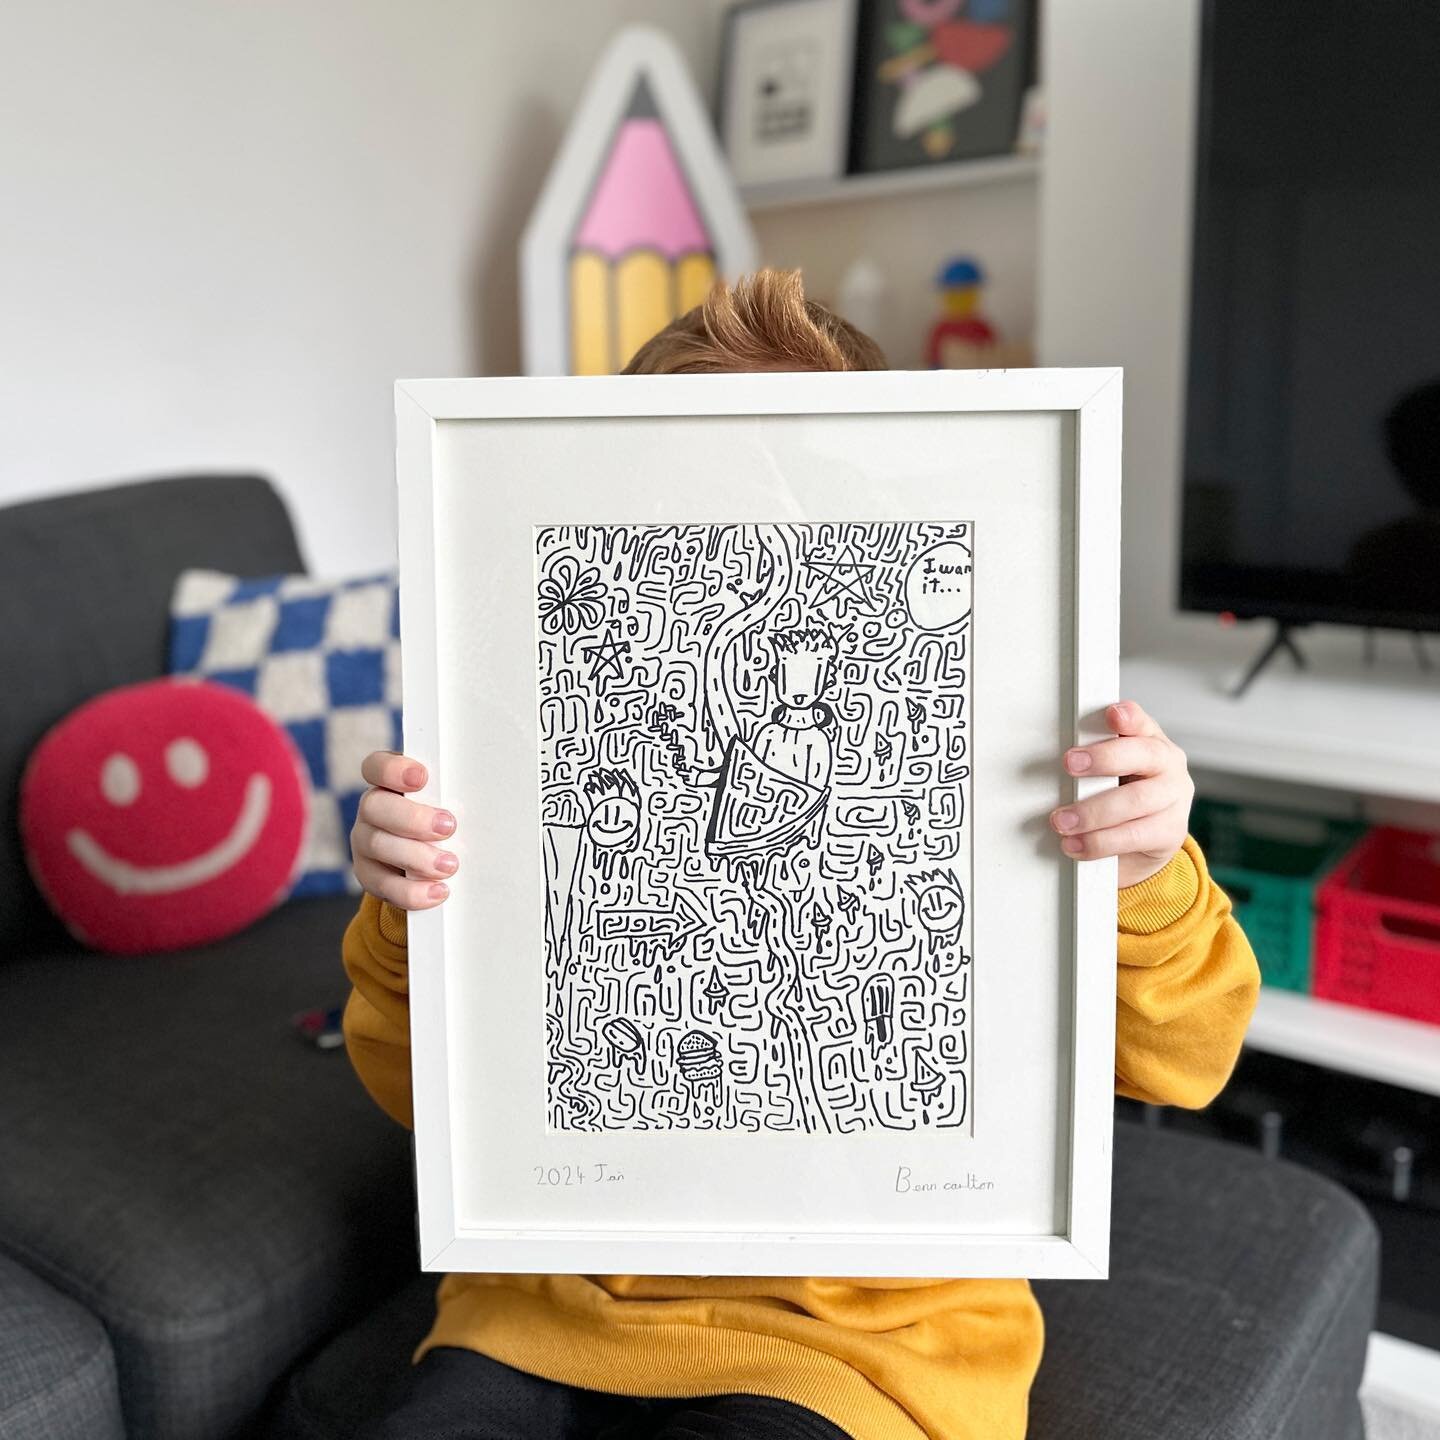 Forever my kids hype person 💛 This mornings doodle framed and ready for the living room gallery 🫶